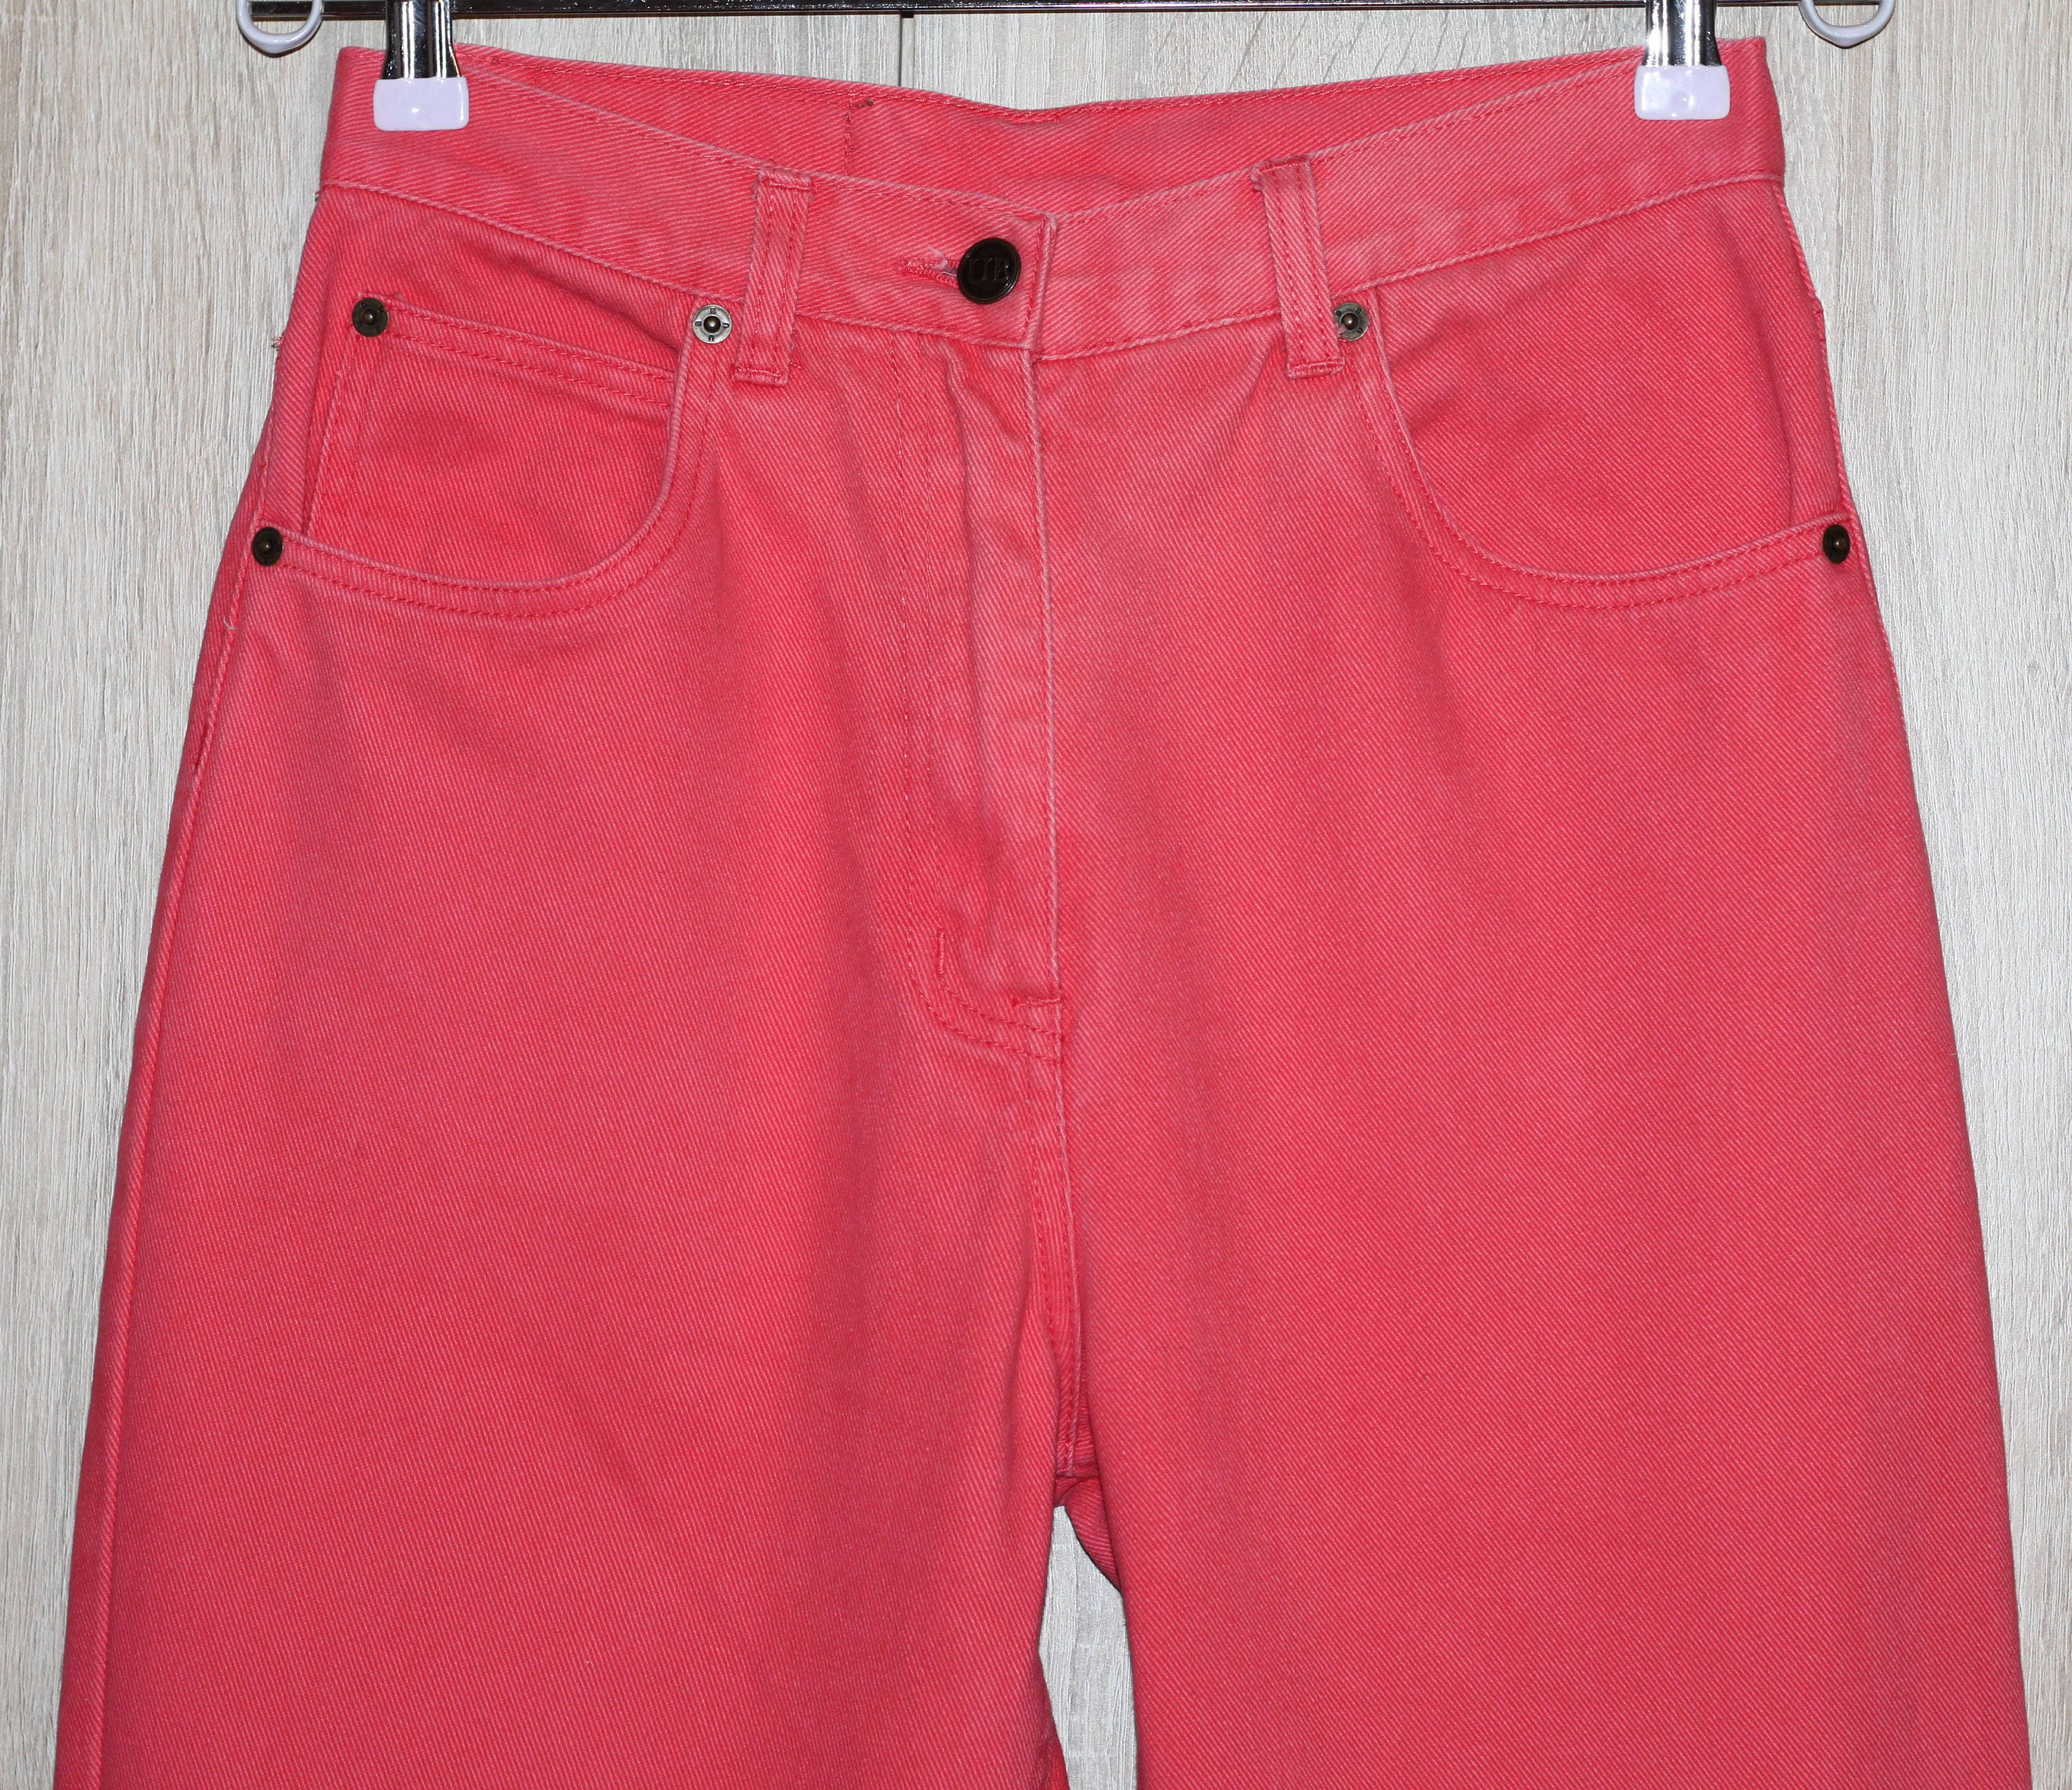 Mackays Jeans Vintage Mom Jeans 3/4 Pants High Waisted Coral - Etsy